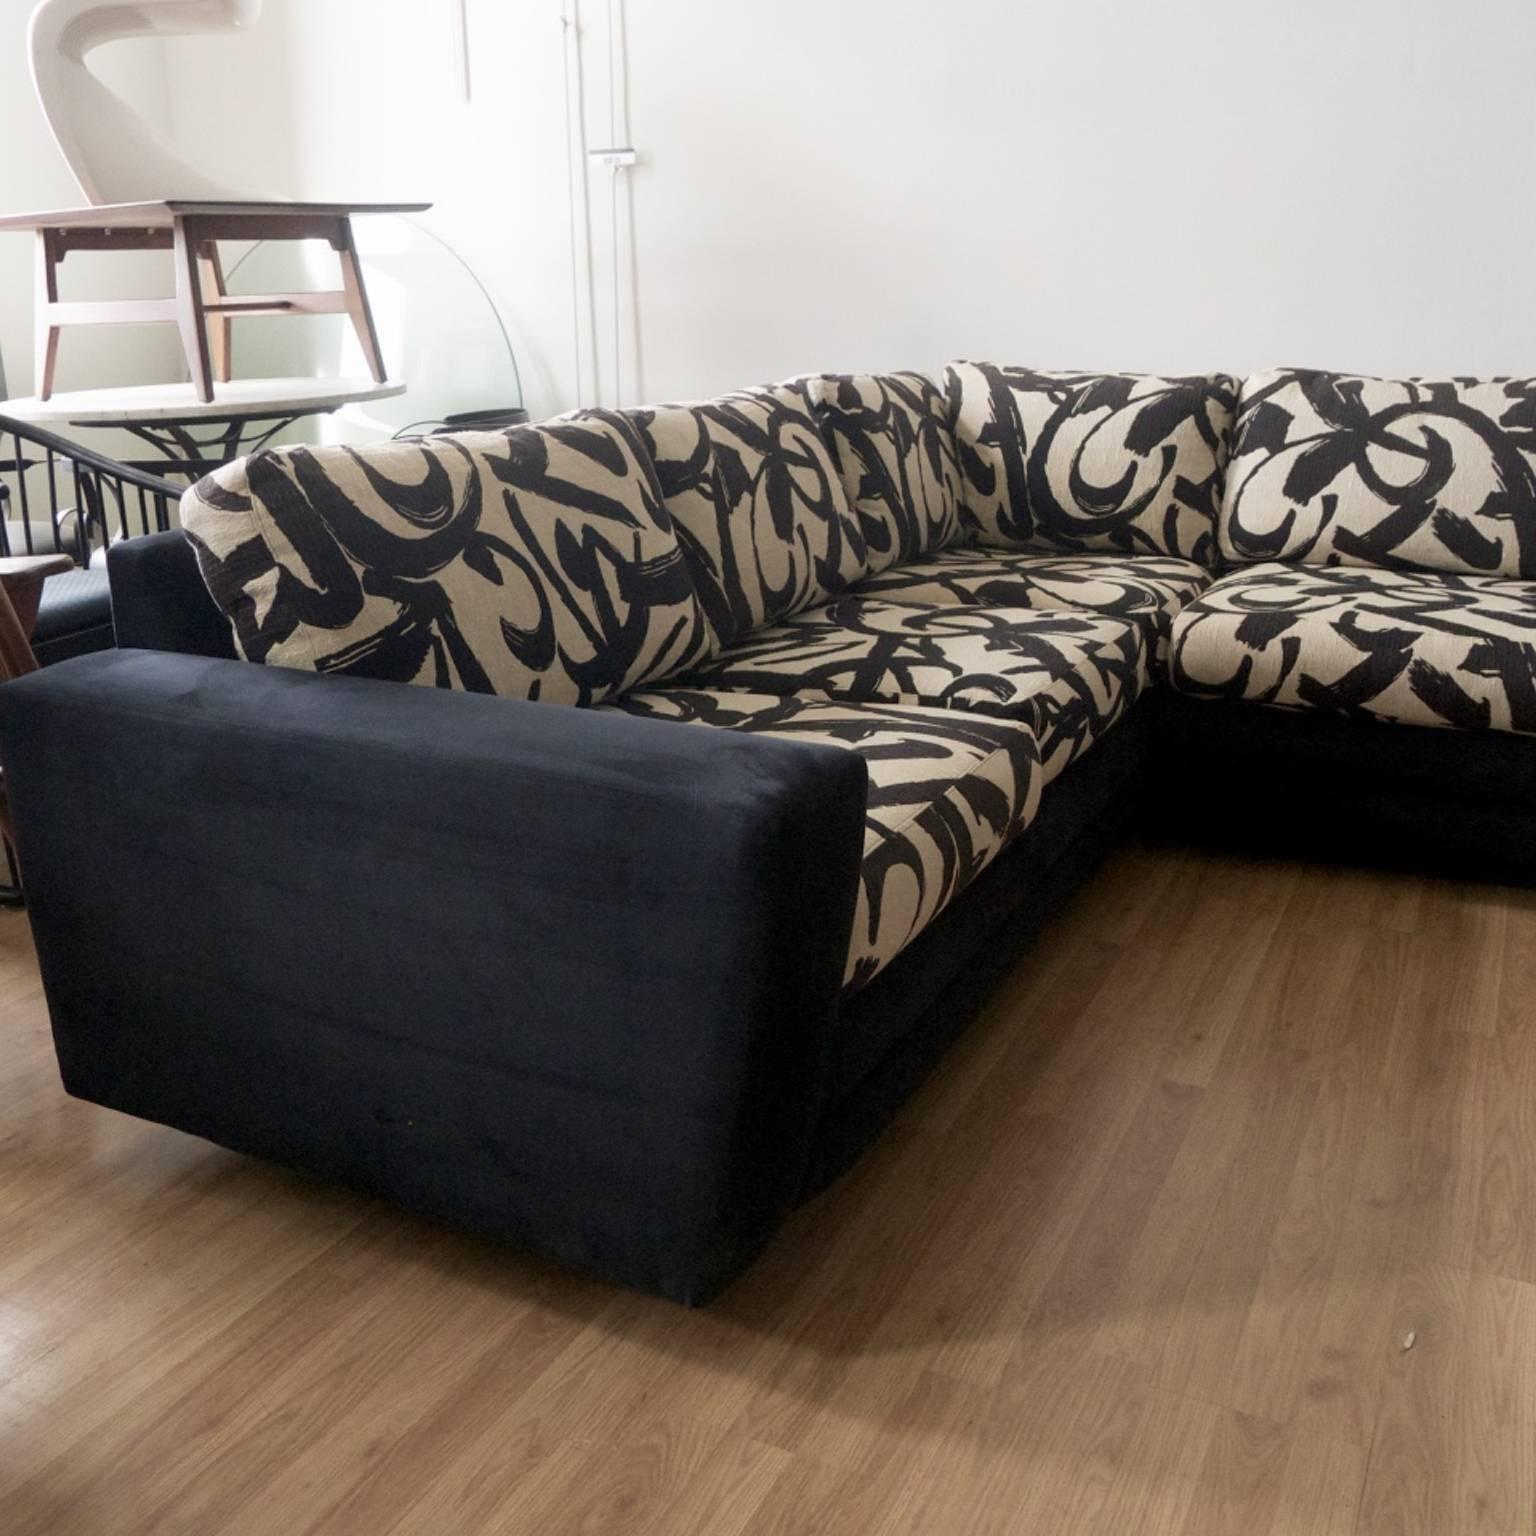 20th Century Monumental Directional Sectional Sofa with Modernist Abstract Op Art